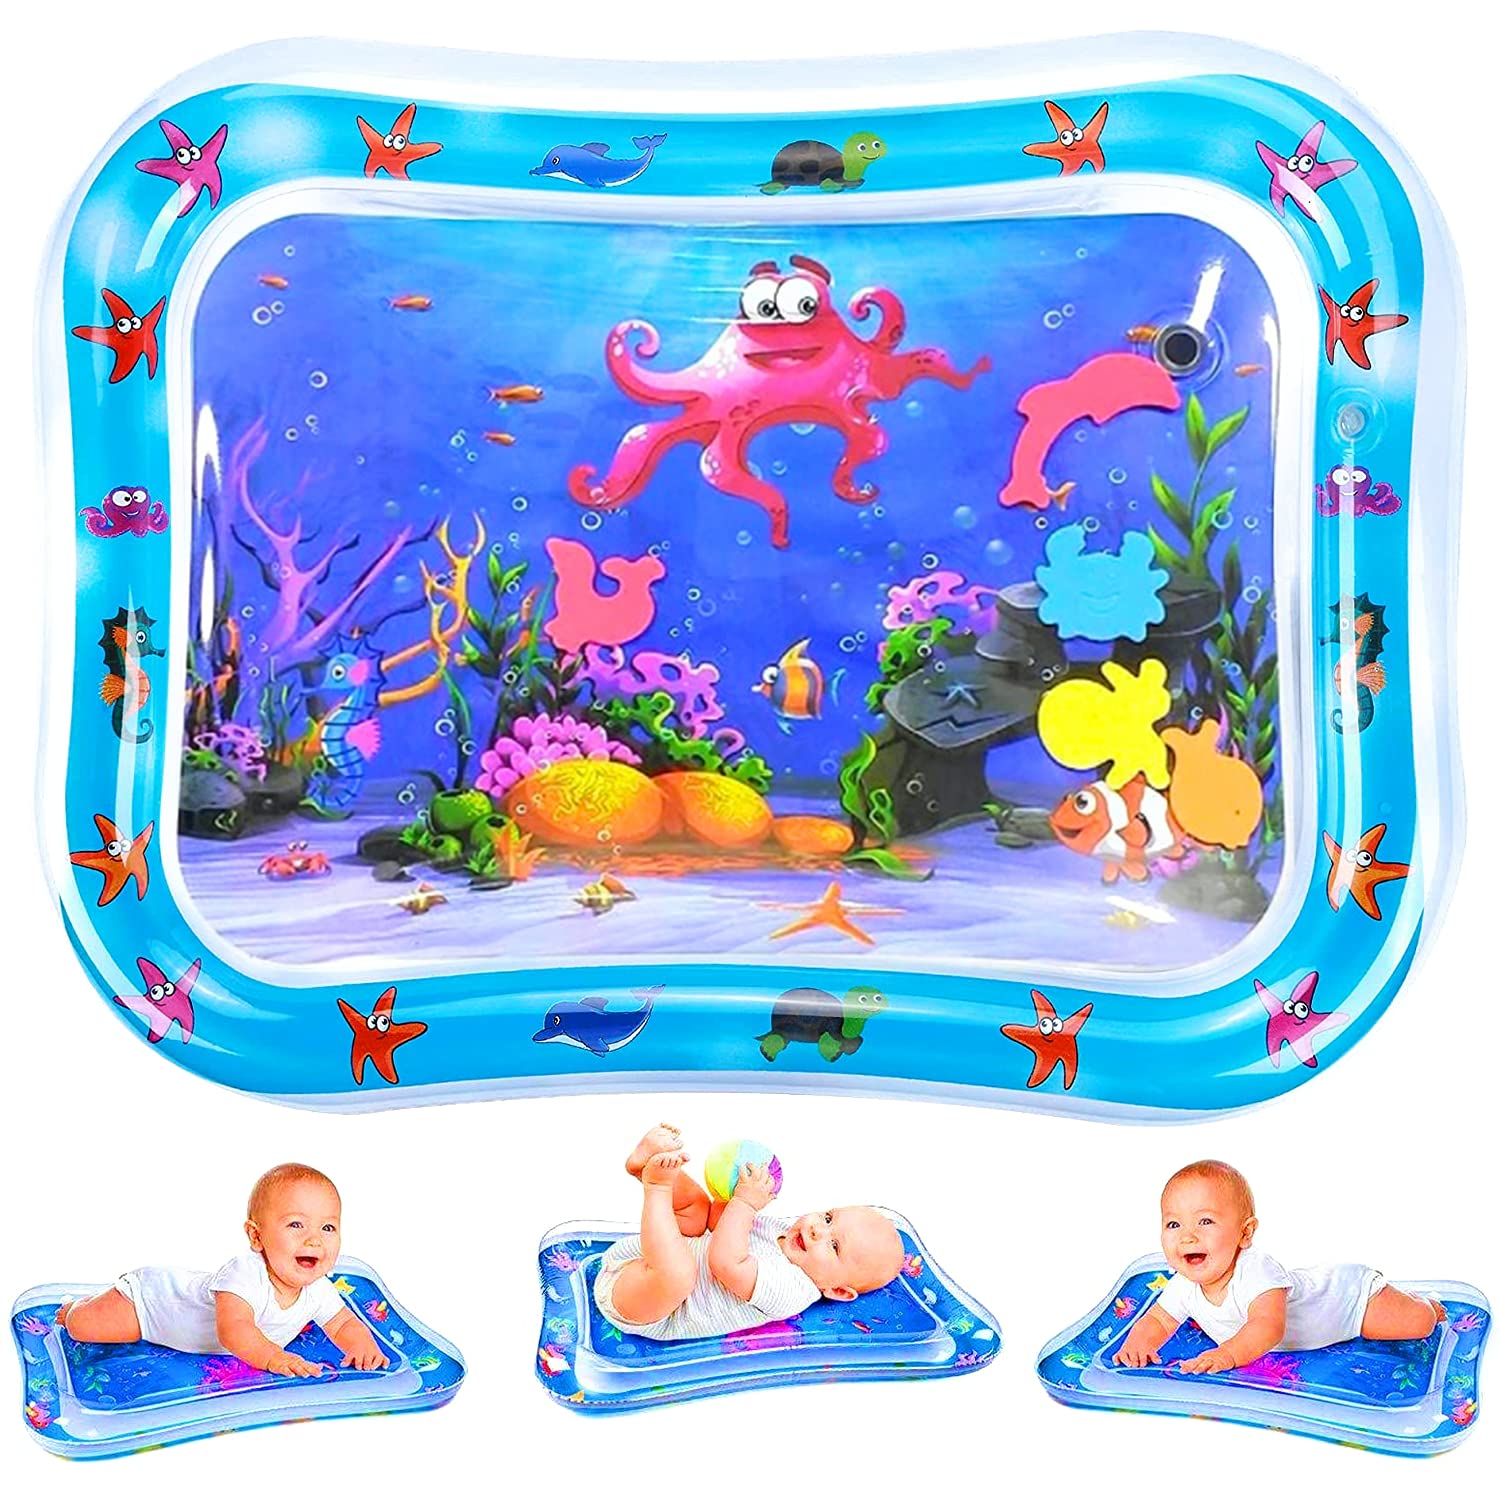 Tummy time Inflatable Water mat for Baby | Fun Activity Center | Sensory Stimulation, Play & Early Development | for Girls & Boys, Newborn Infants to Toddlers (3 – 12 mths)